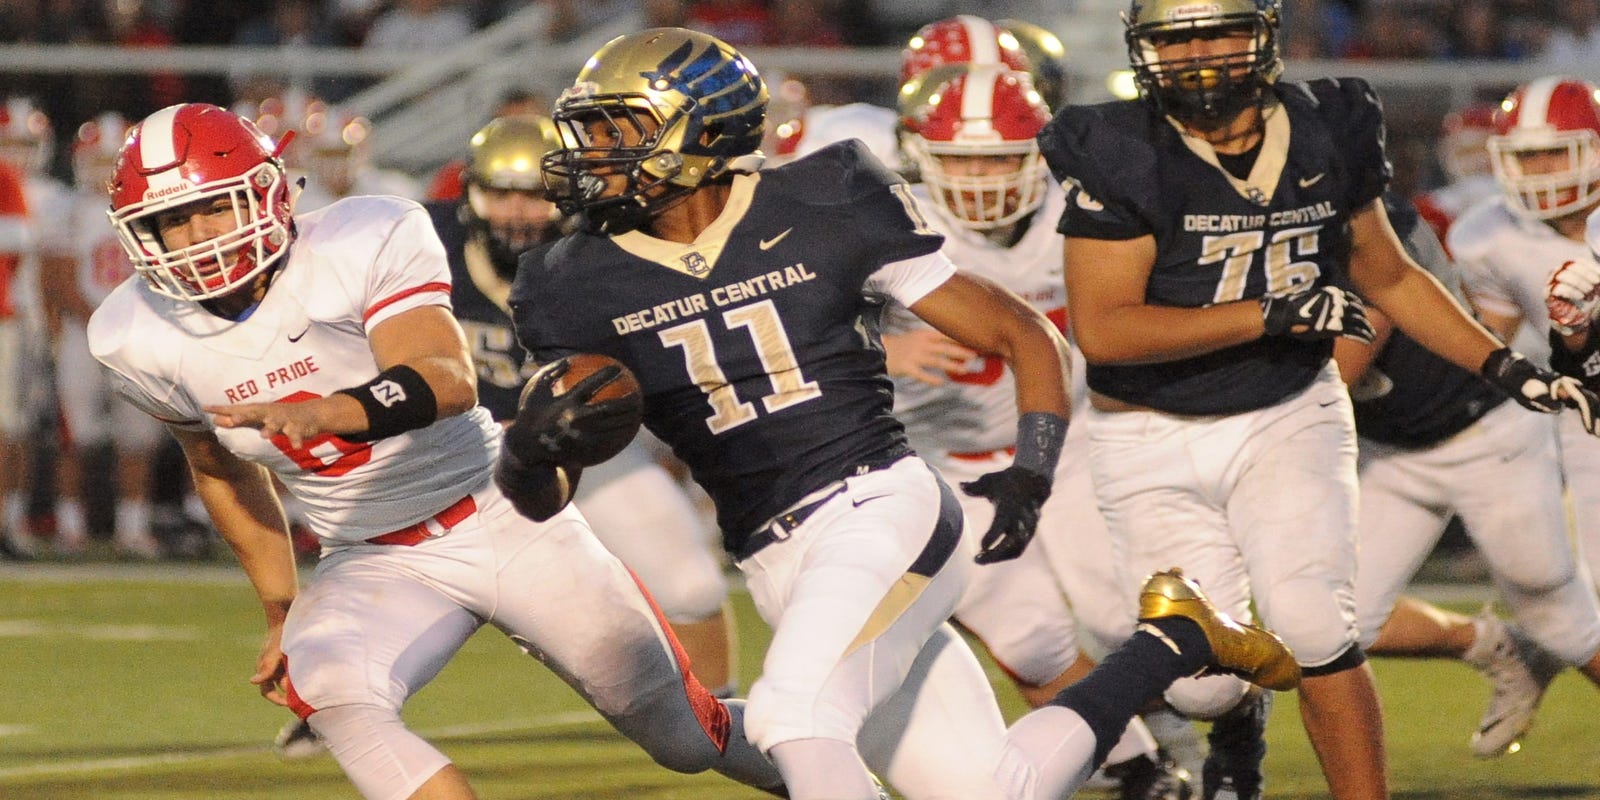 IHSAA football: Tyrone Tracy carries Decatur Central past Plainfield